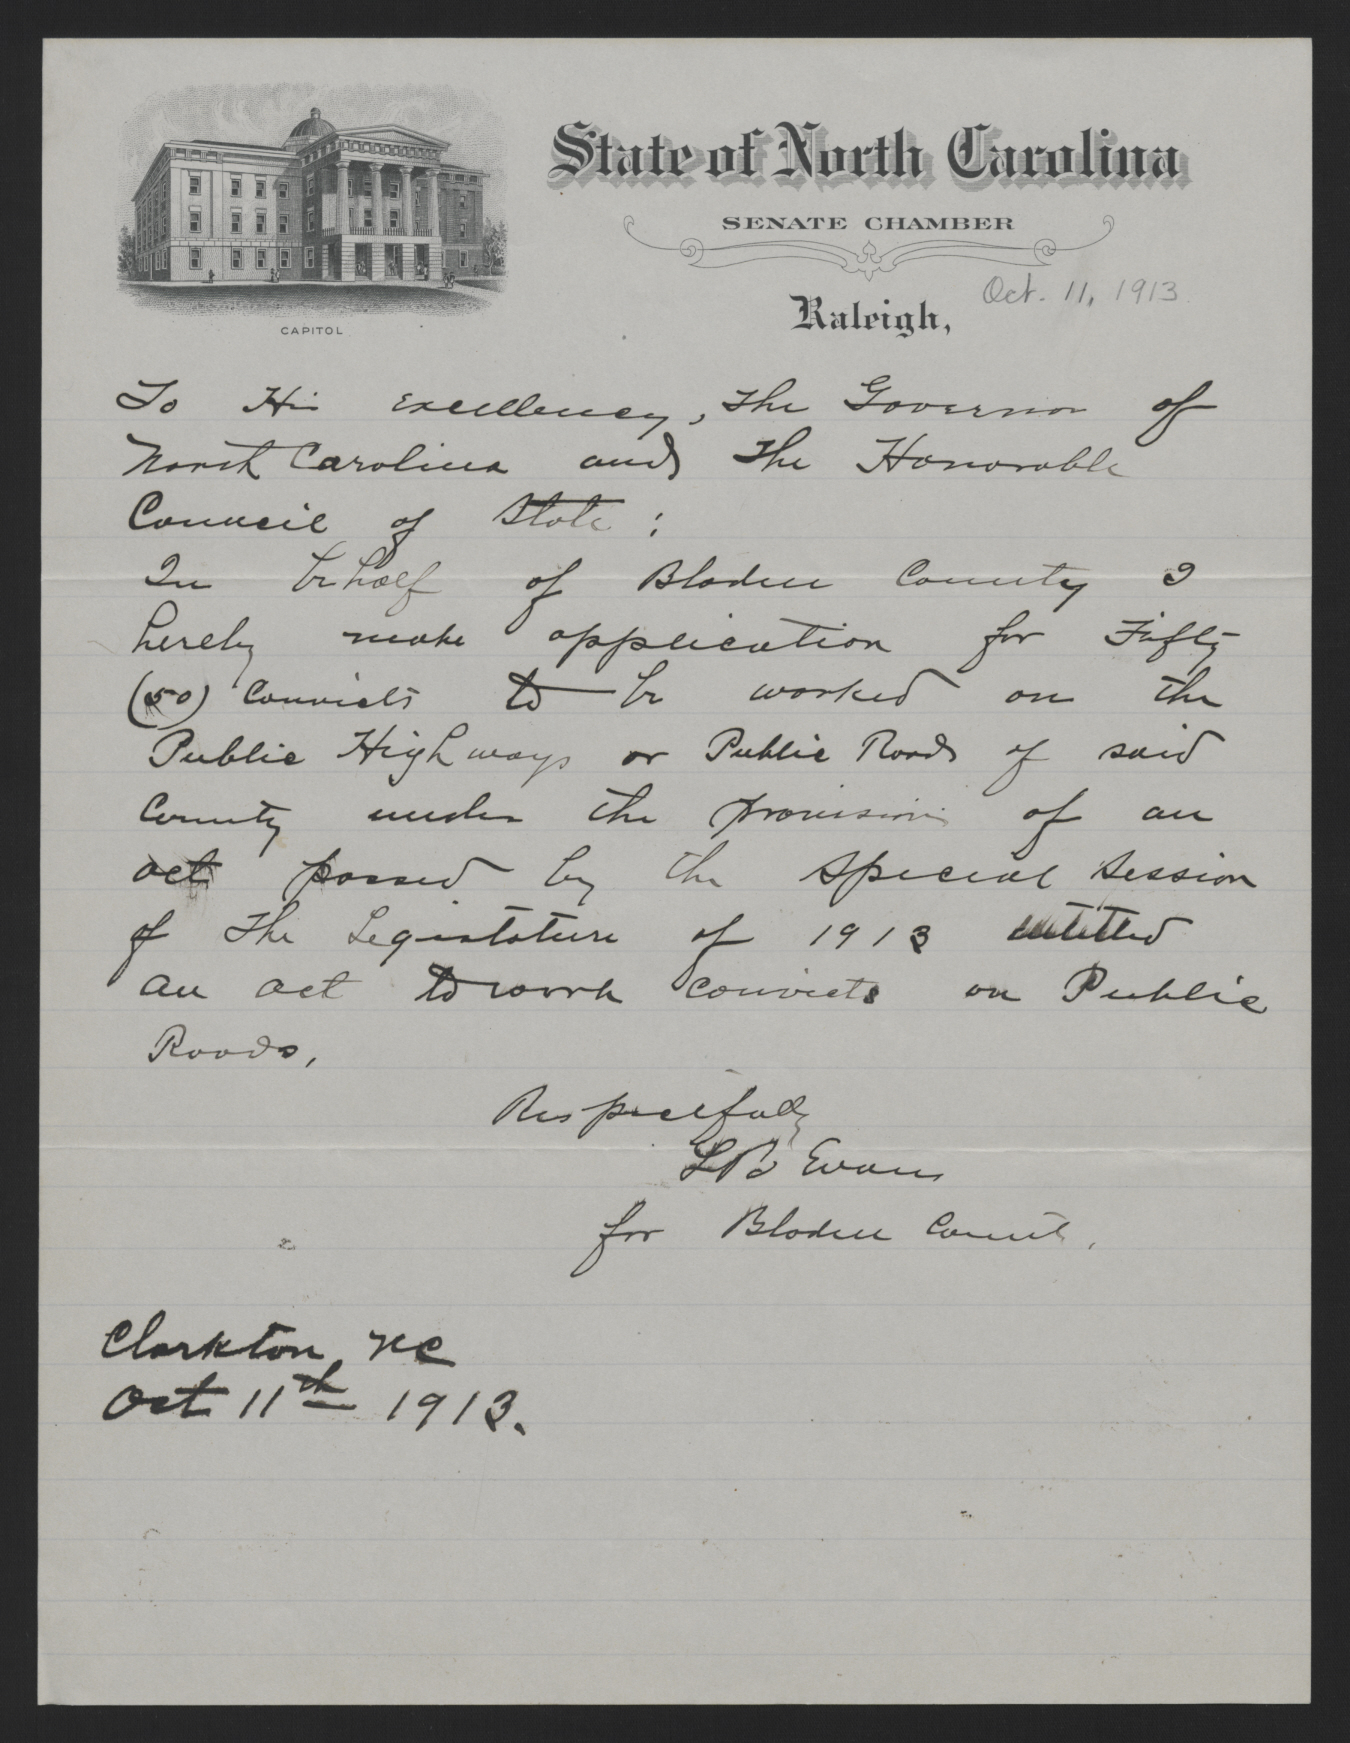 Letter from Evans to Craig, October 11, 1913